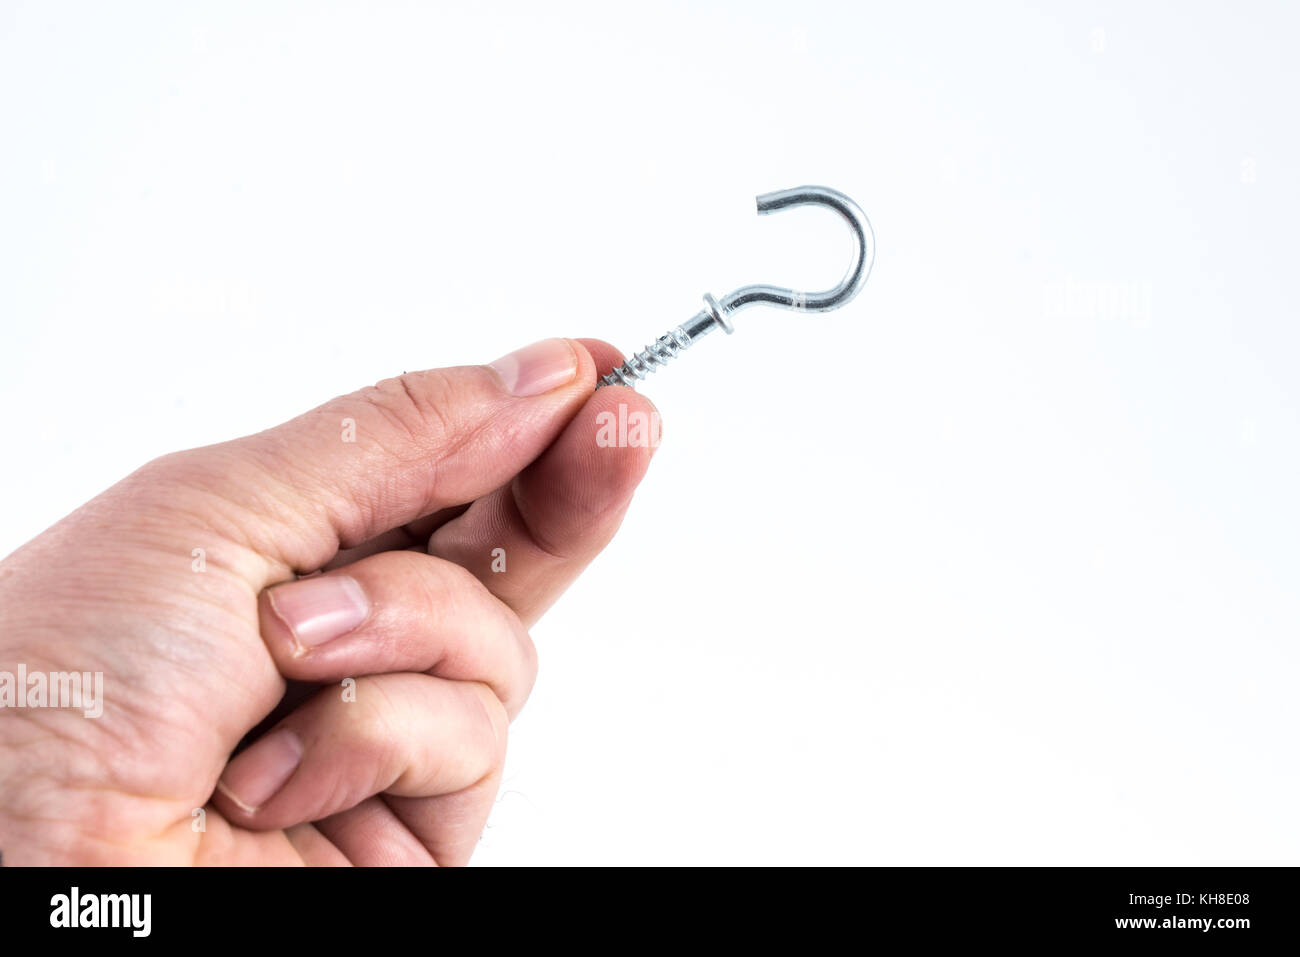 a small metal clip between the fingers Stock Photo